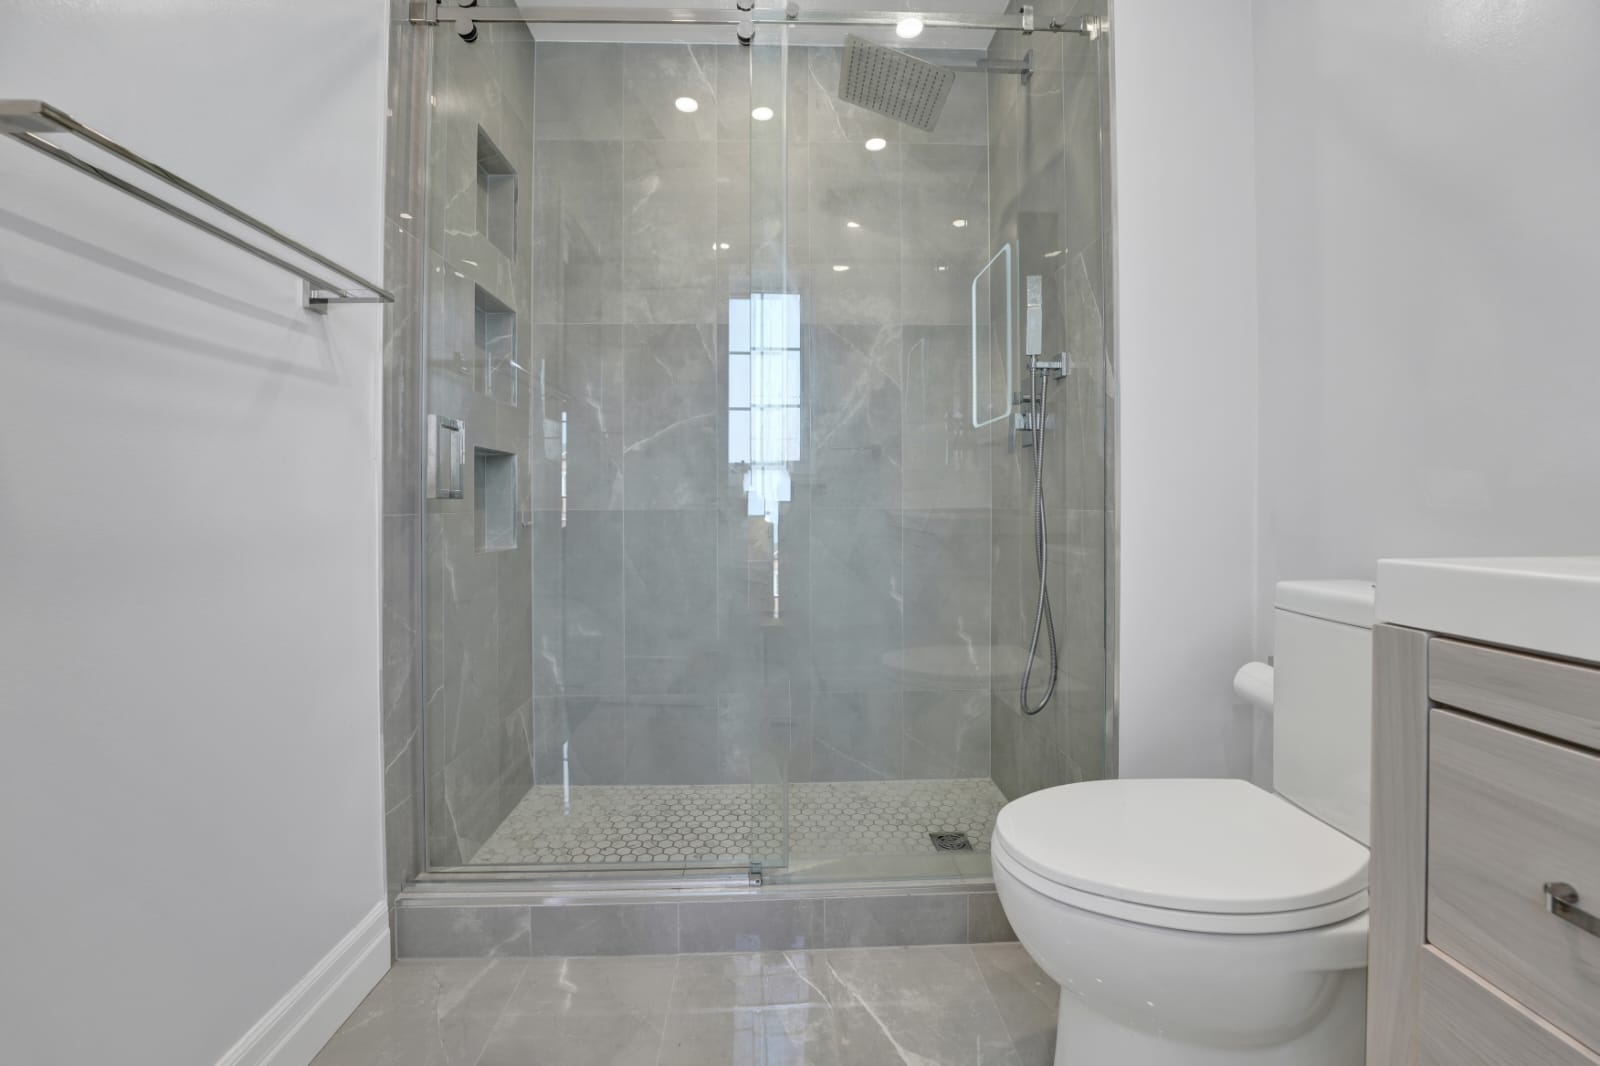 bathroom shower extension project in toronto done by luxe home renovations